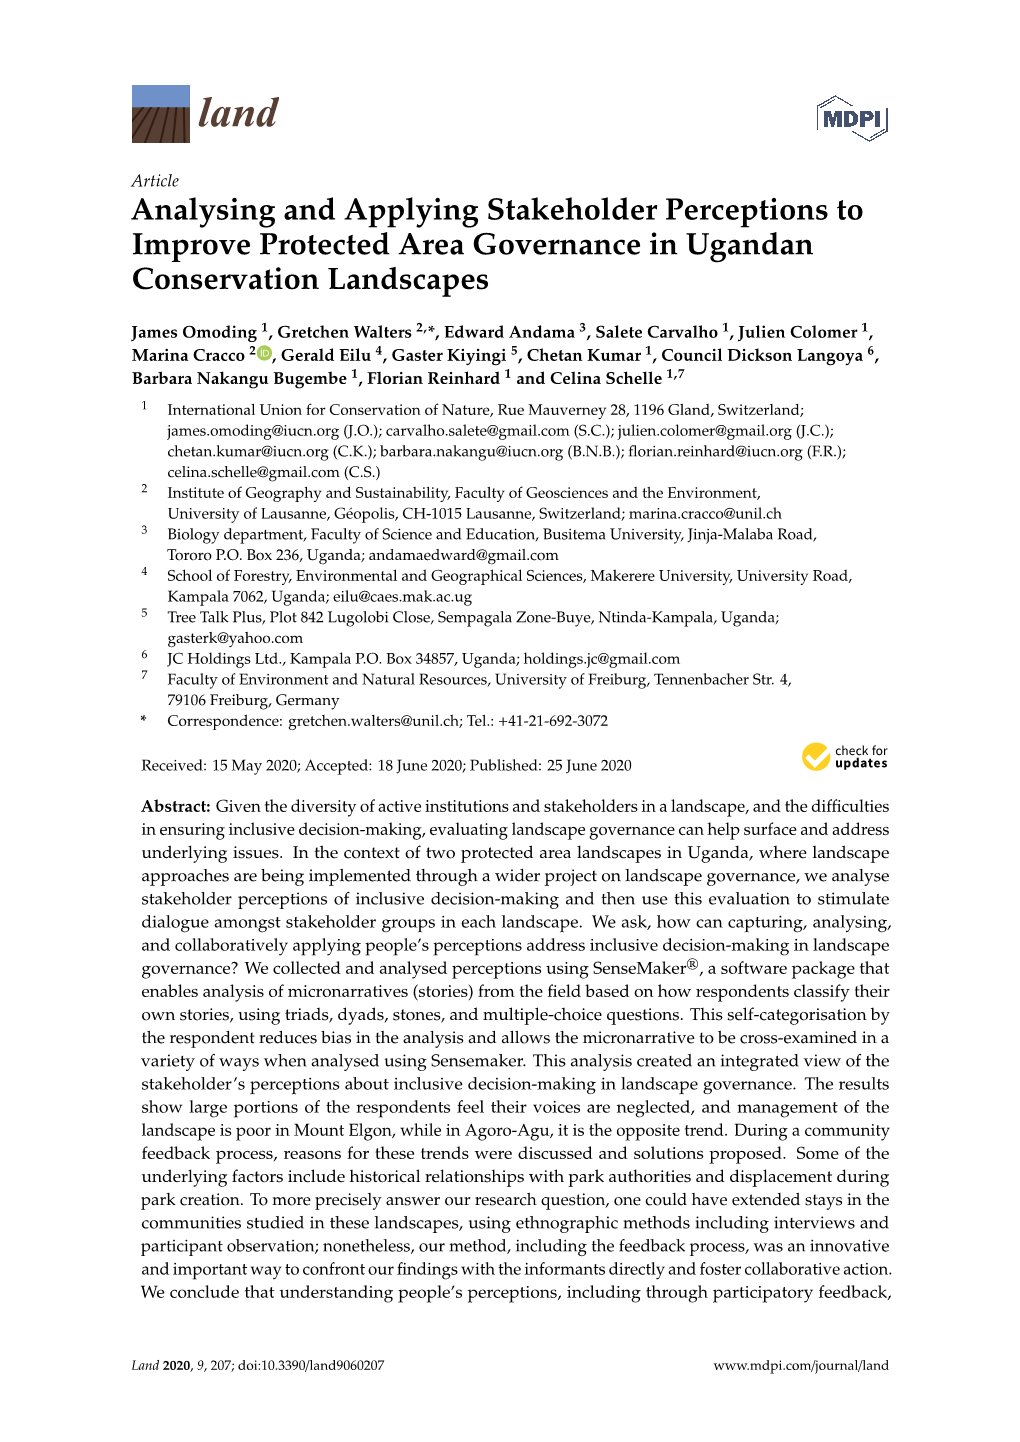 Analysing and Applying Stakeholder Perceptions to Improve Protected Area Governance in Ugandan Conservation Landscapes